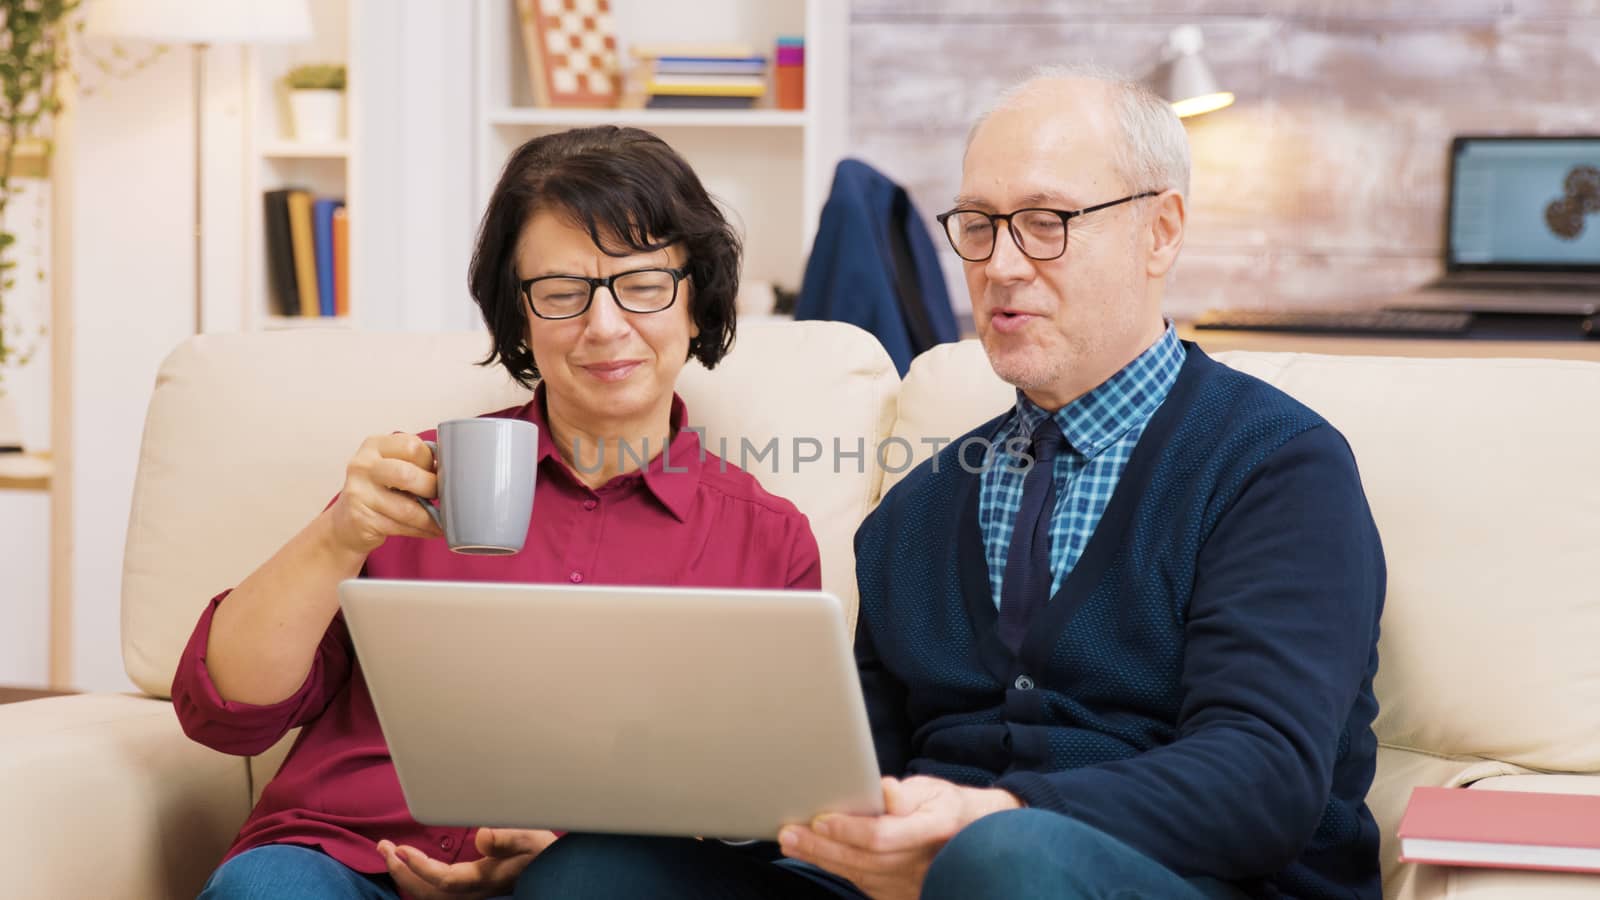 Elderly age couple sitting on sofa holding laptop during a video call. by DCStudio